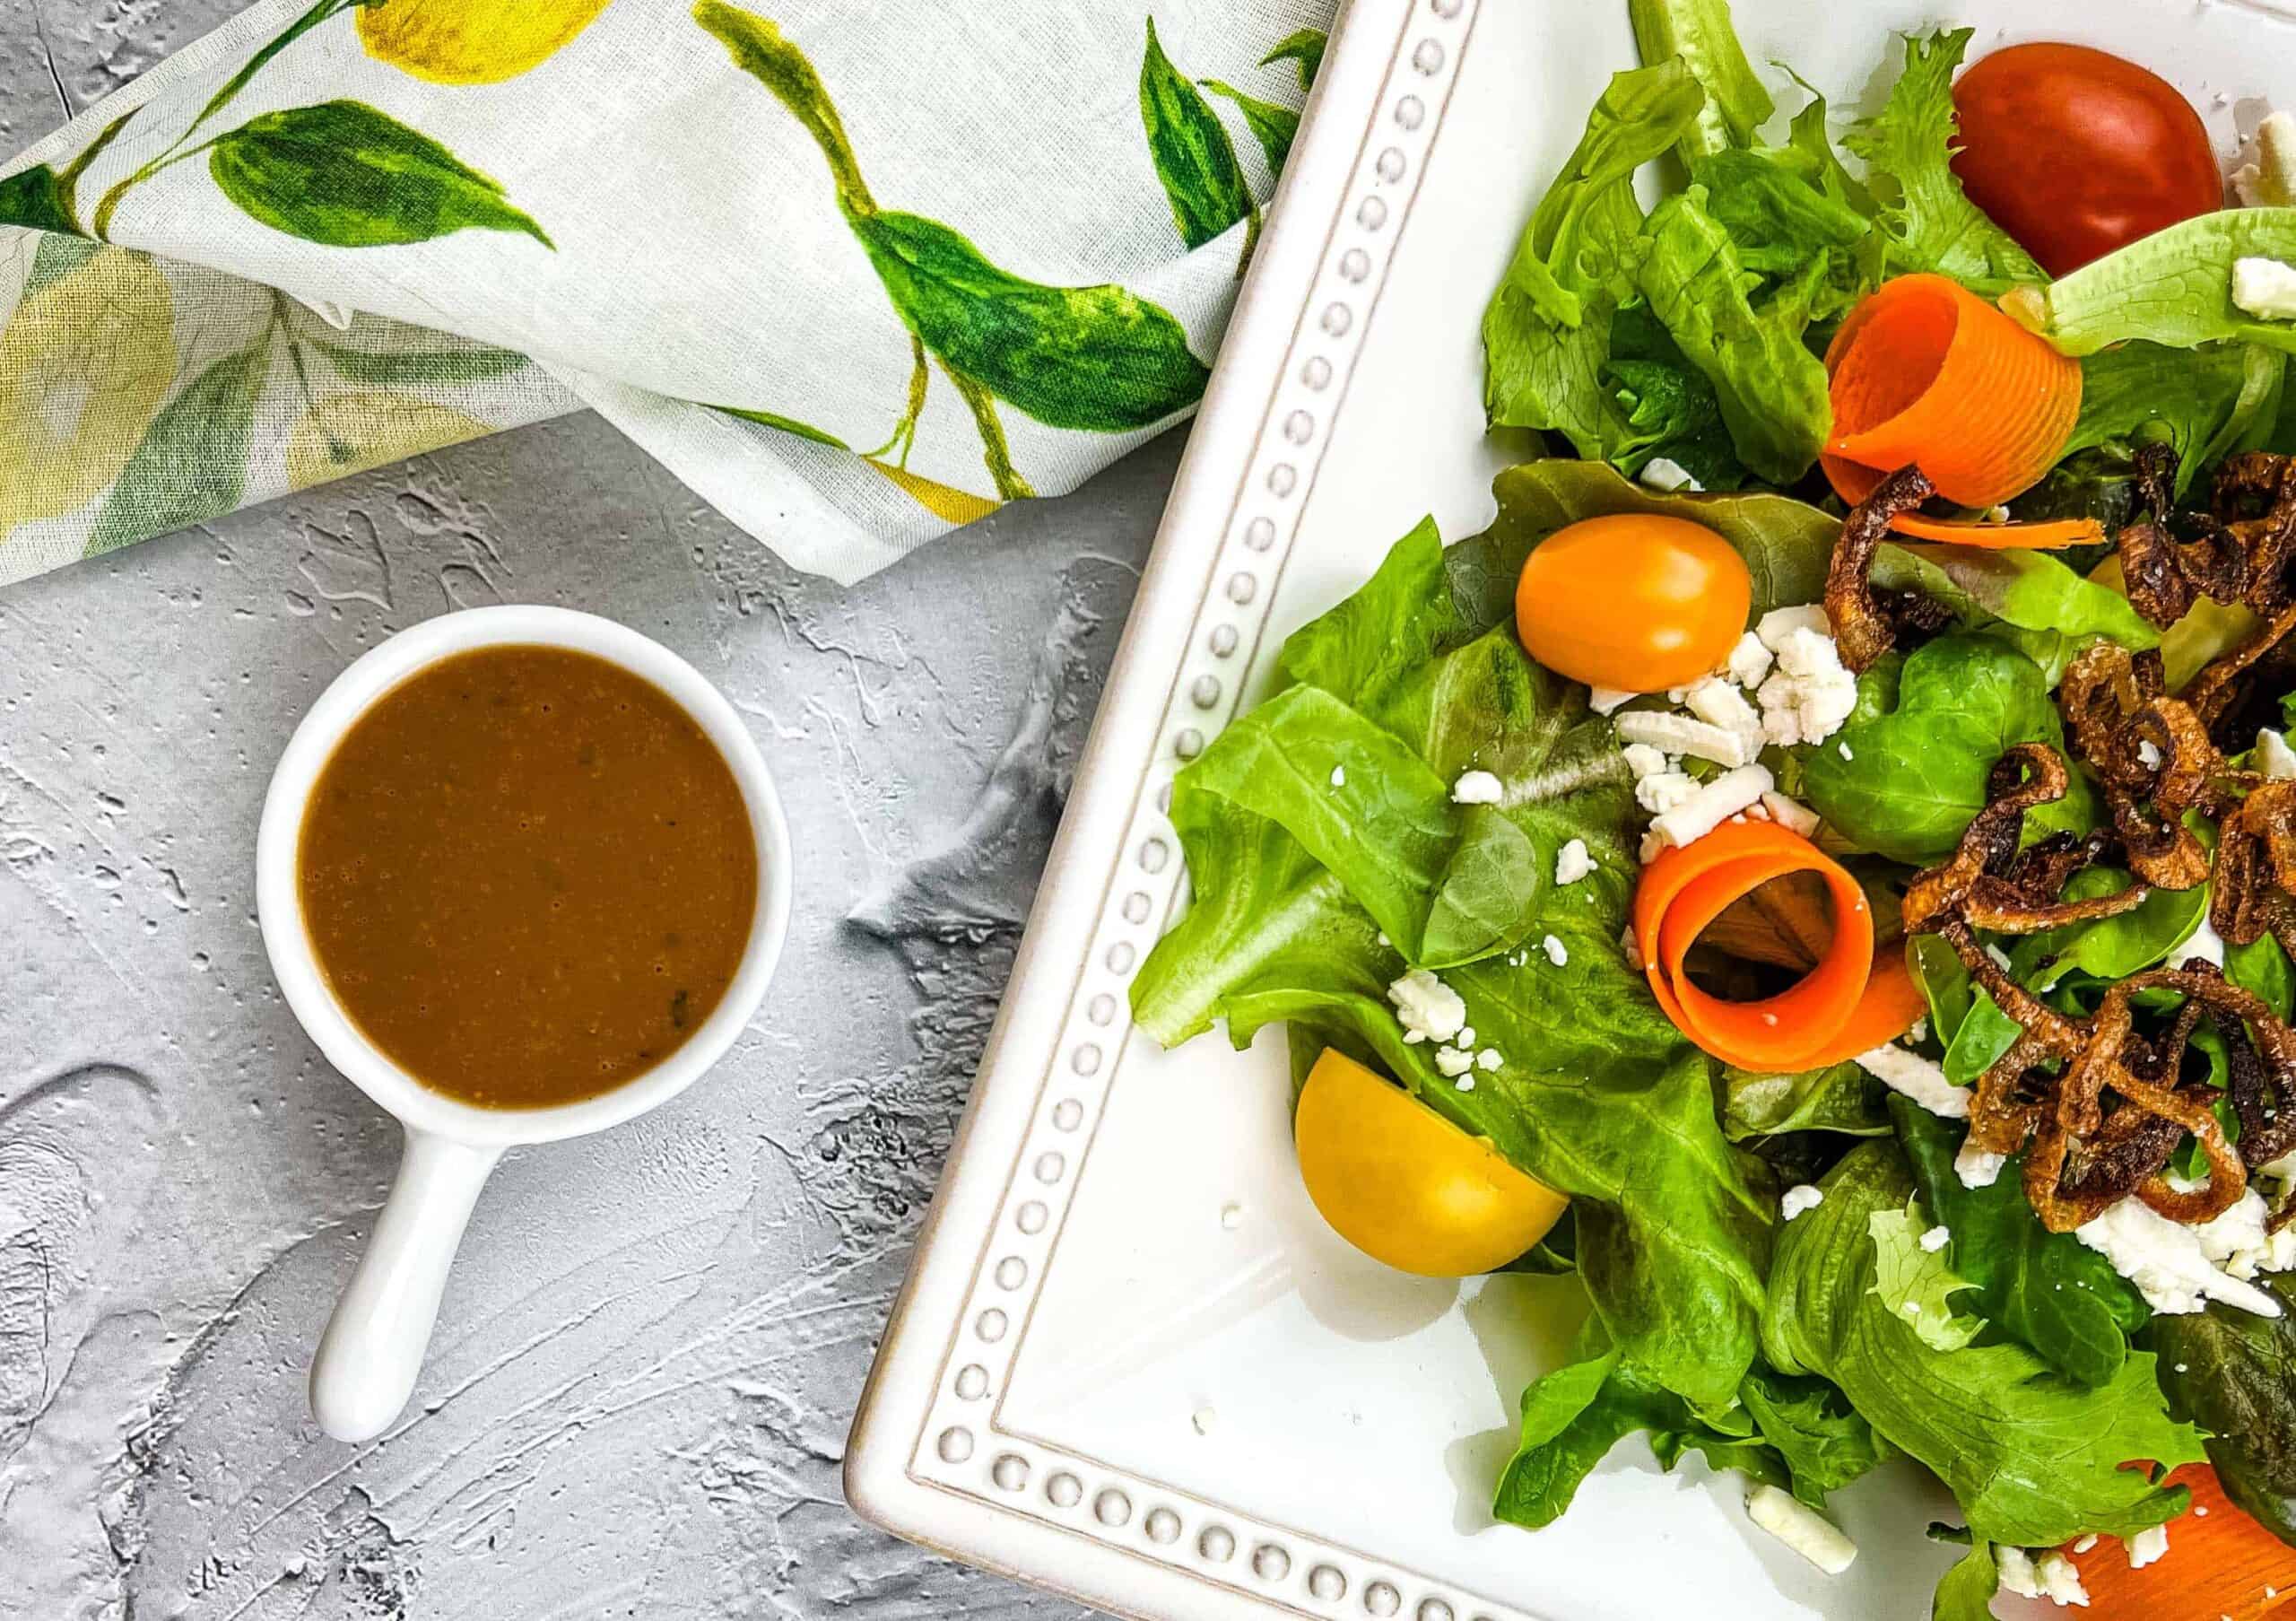 A white plate of creamy balsamic vinaigrette salad dressing resting next to a plate of salad.